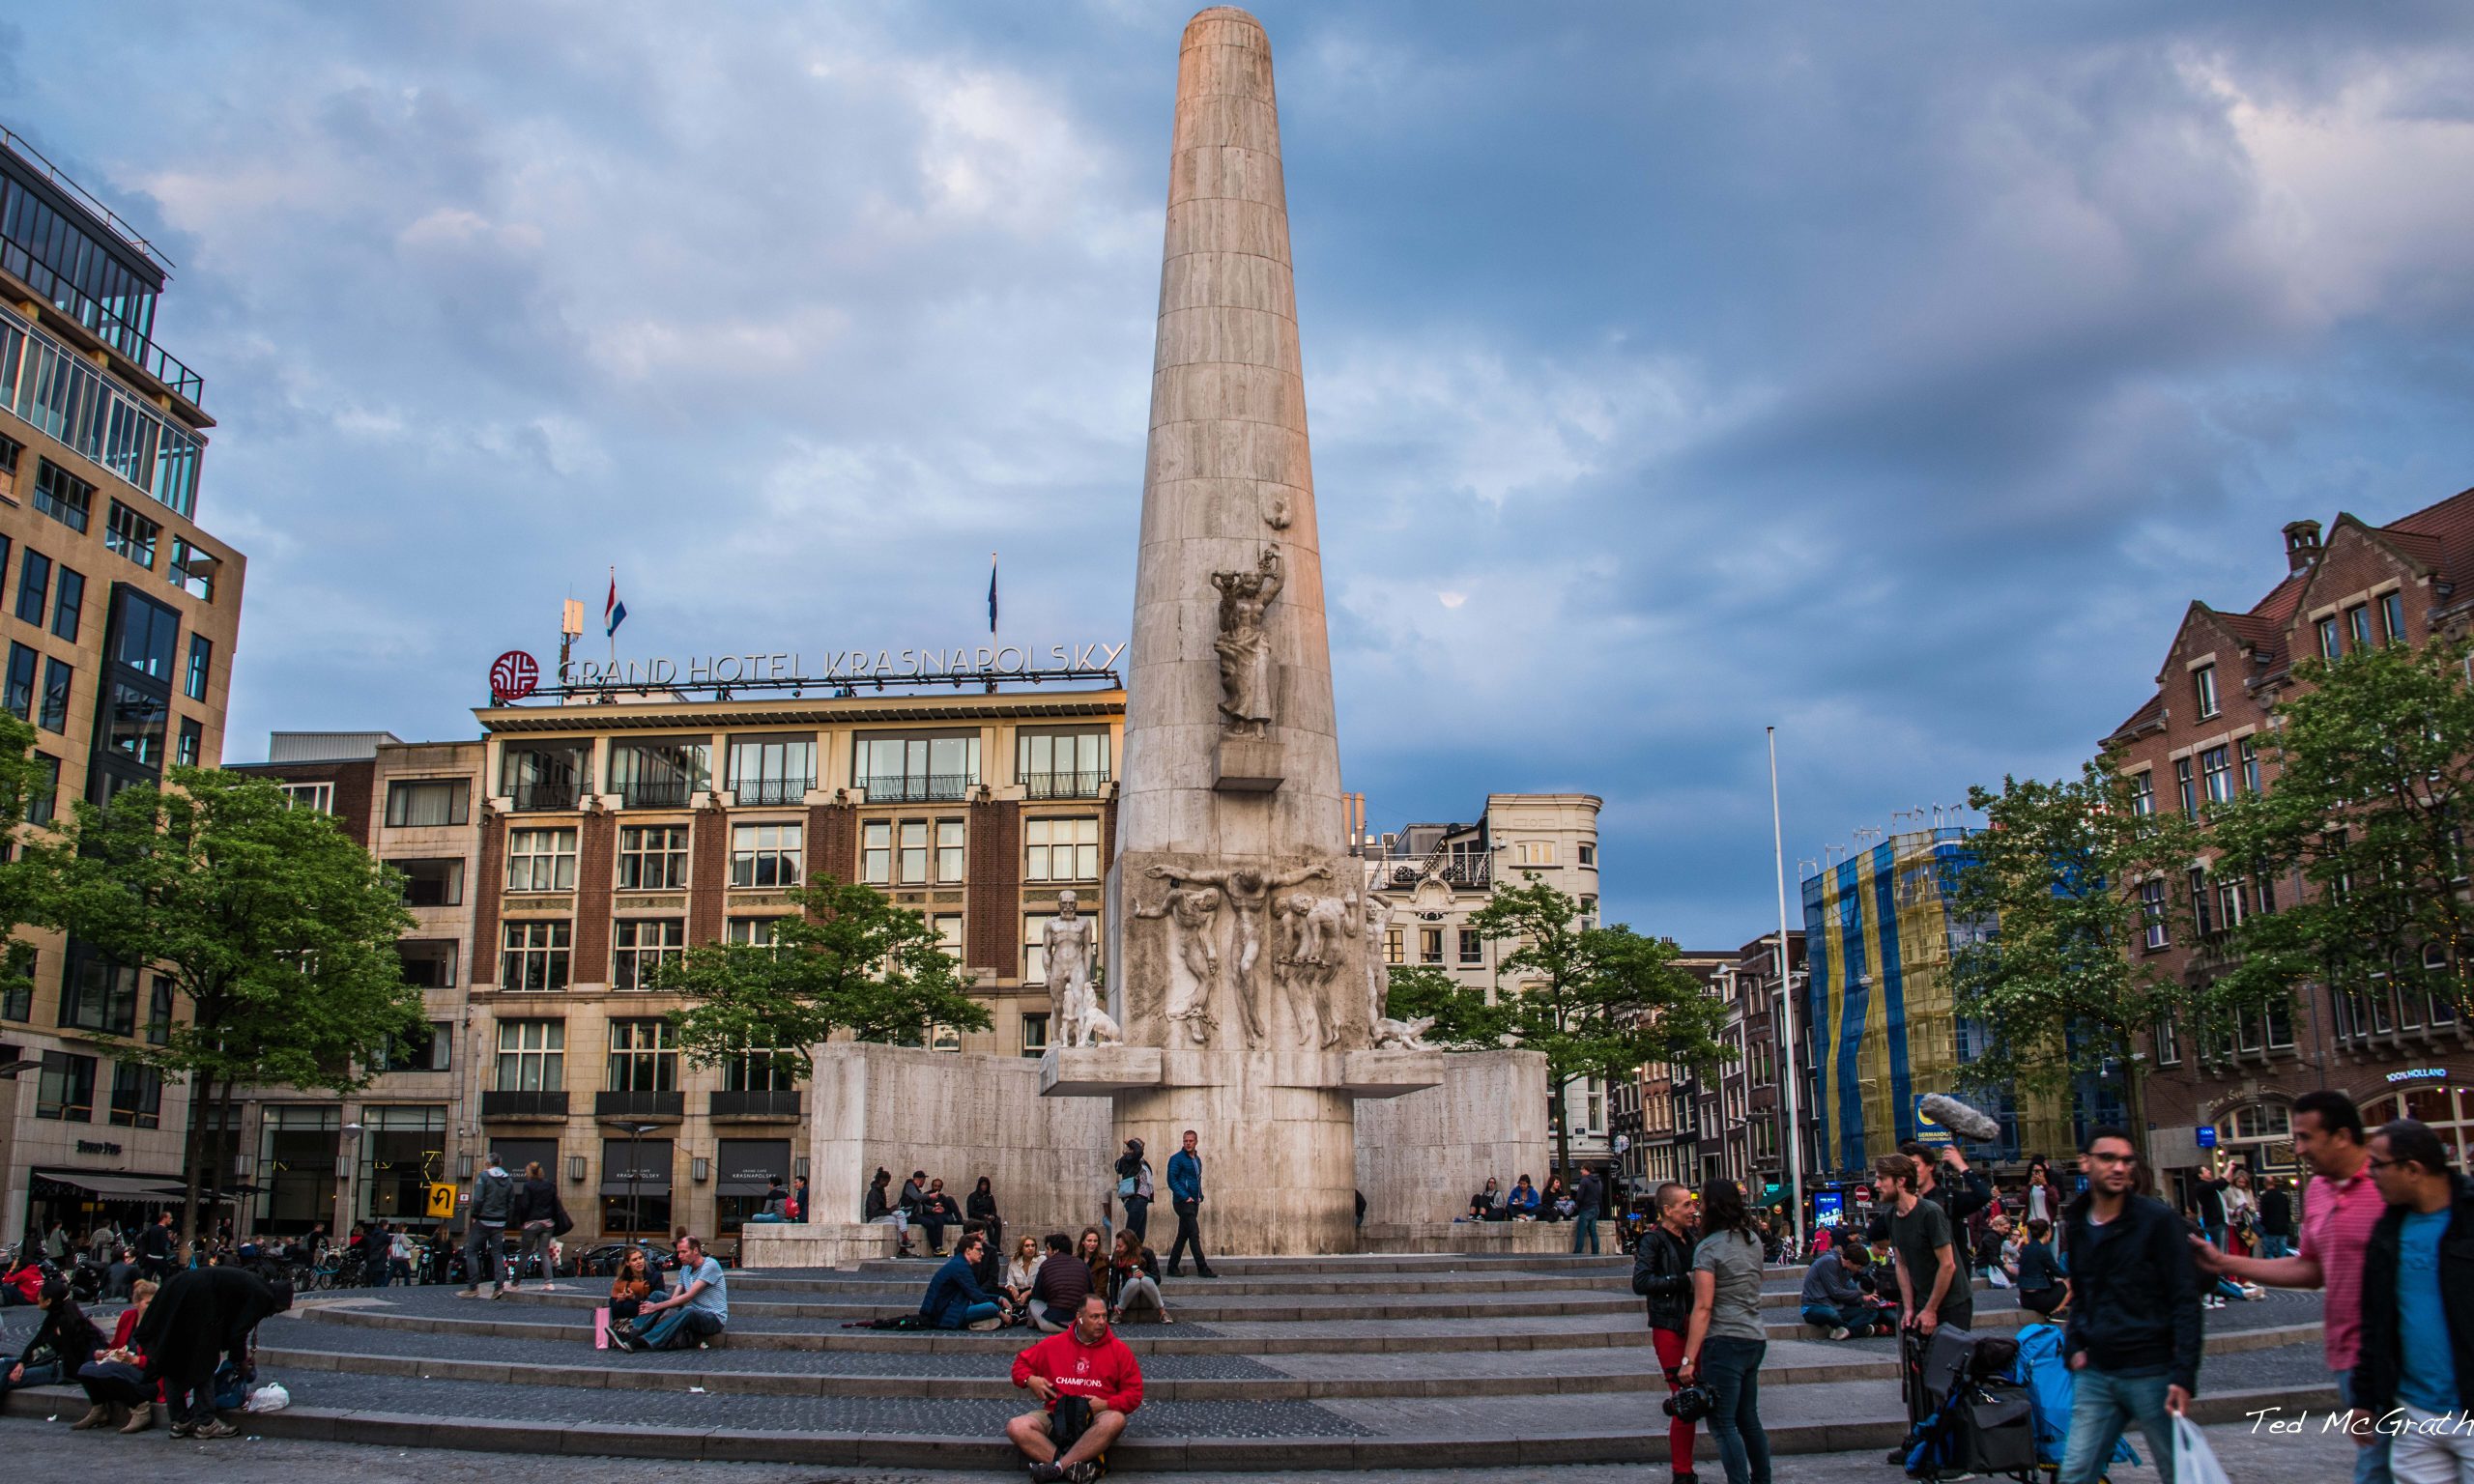 The National Monument on Dam Square in Amsterdam, a tall obelisk with symbolic sculptures, dedicated to World War II victims.